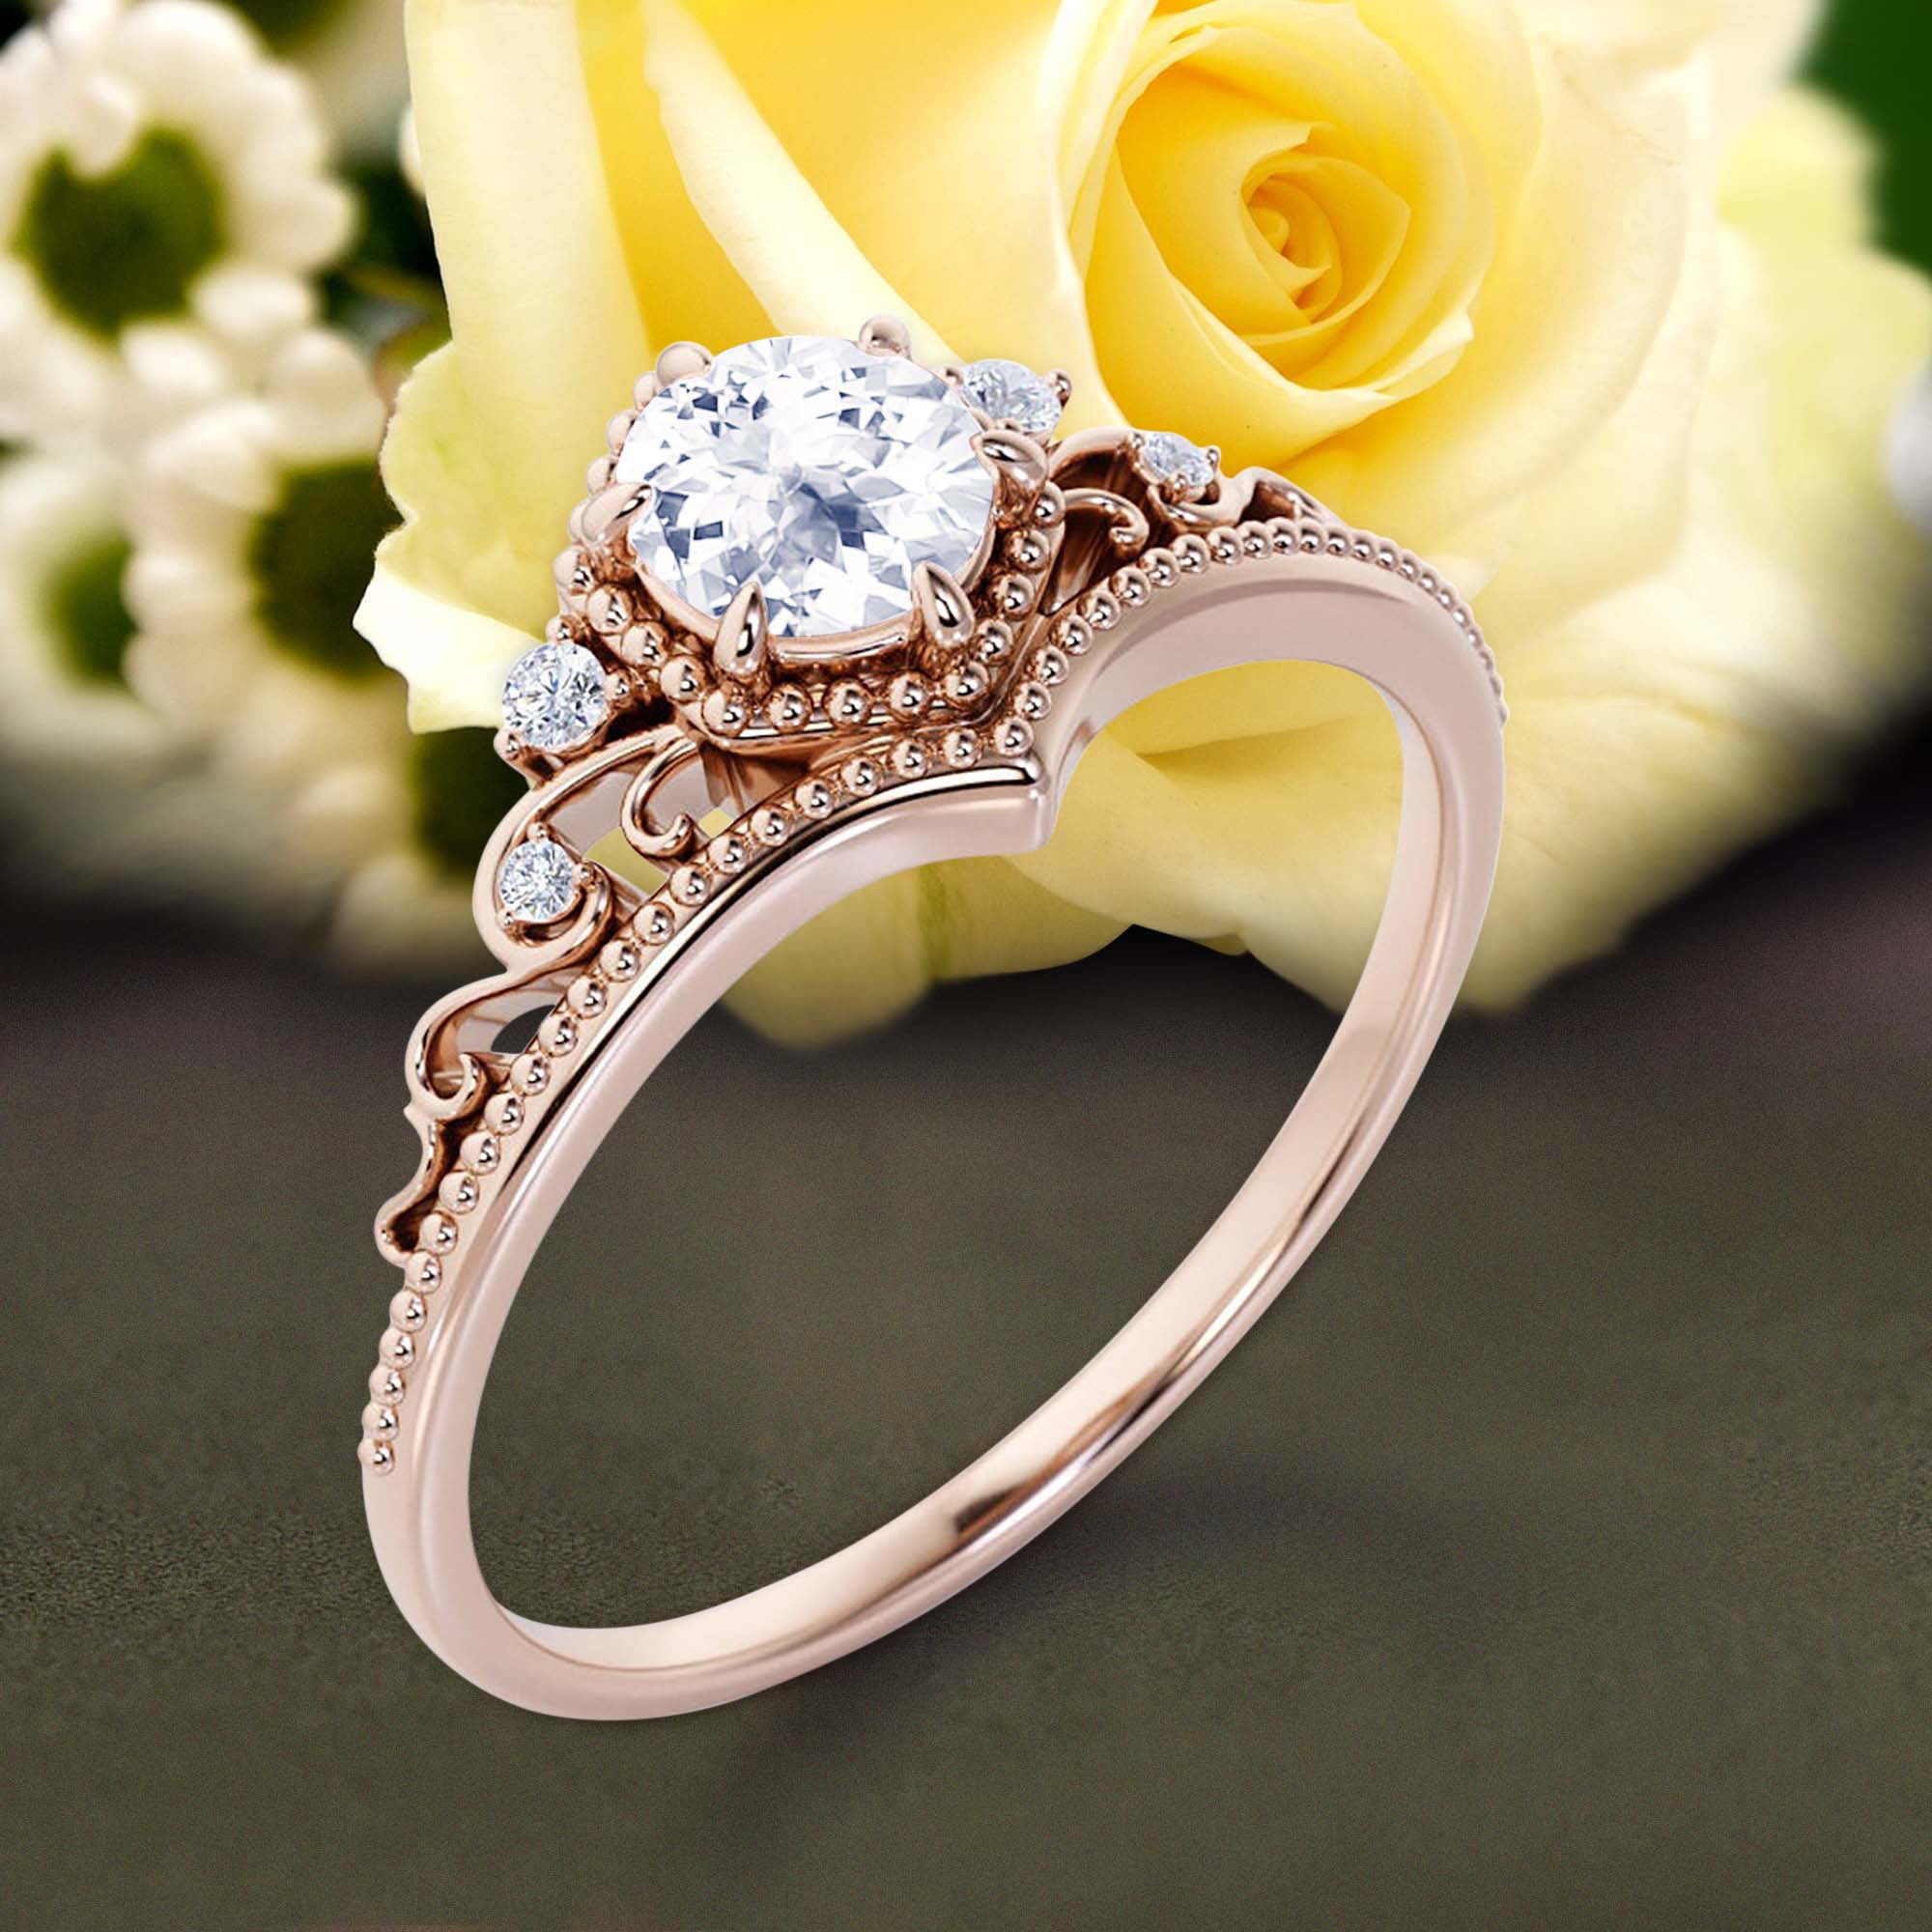 0.6 Carat Solitaire Diamond Engagement Ring for Her Gullei.com